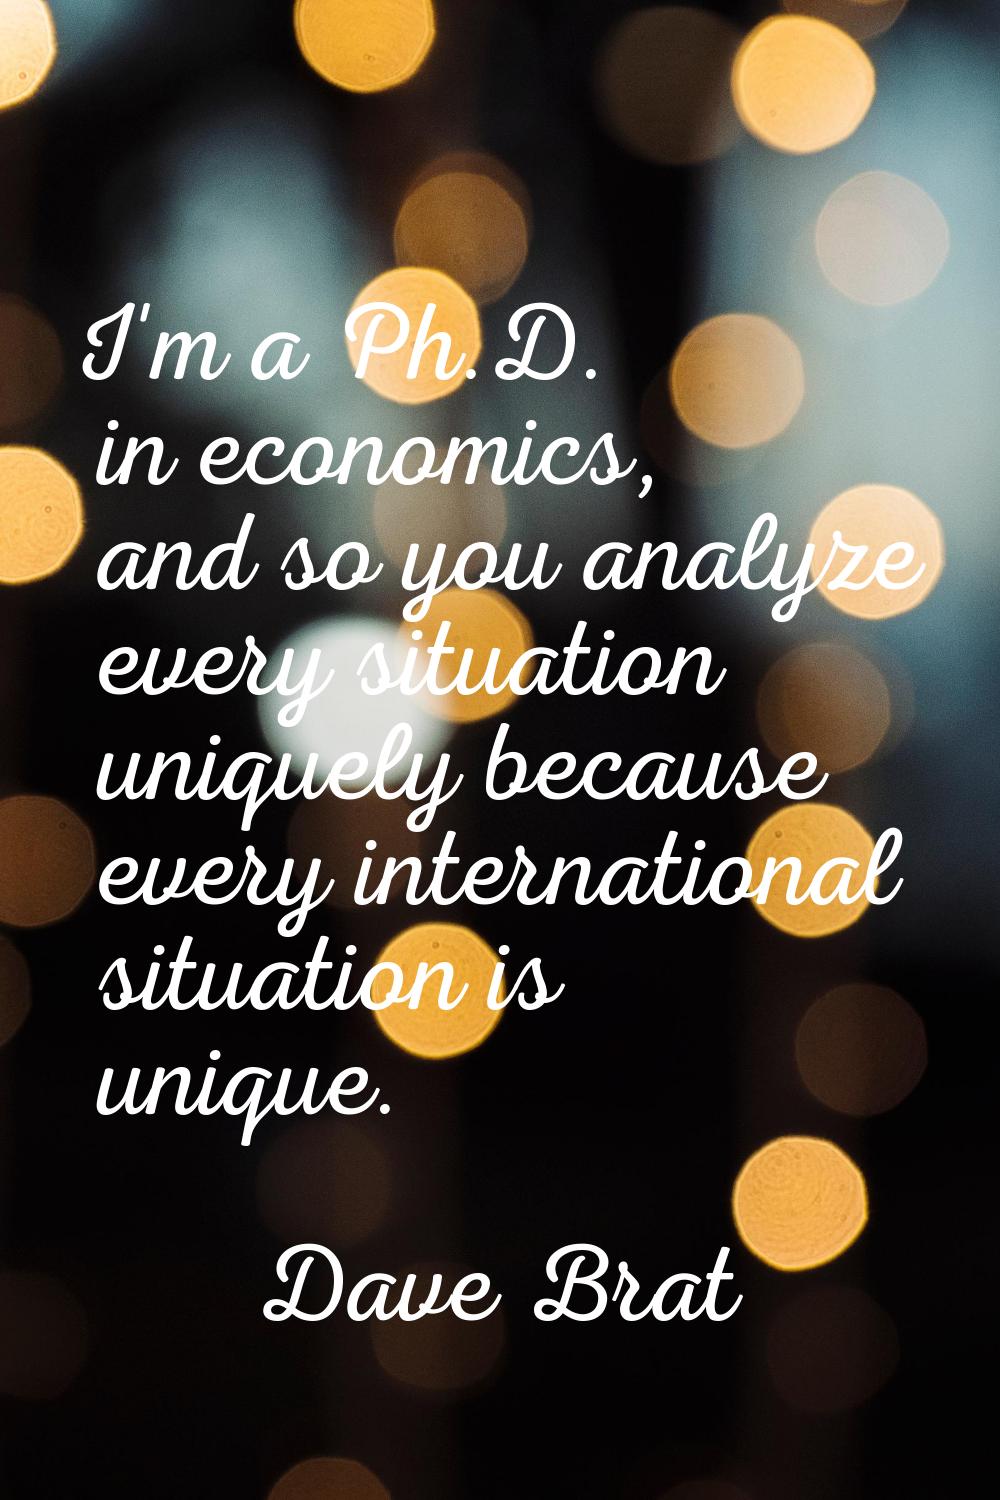 I'm a Ph.D. in economics, and so you analyze every situation uniquely because every international s